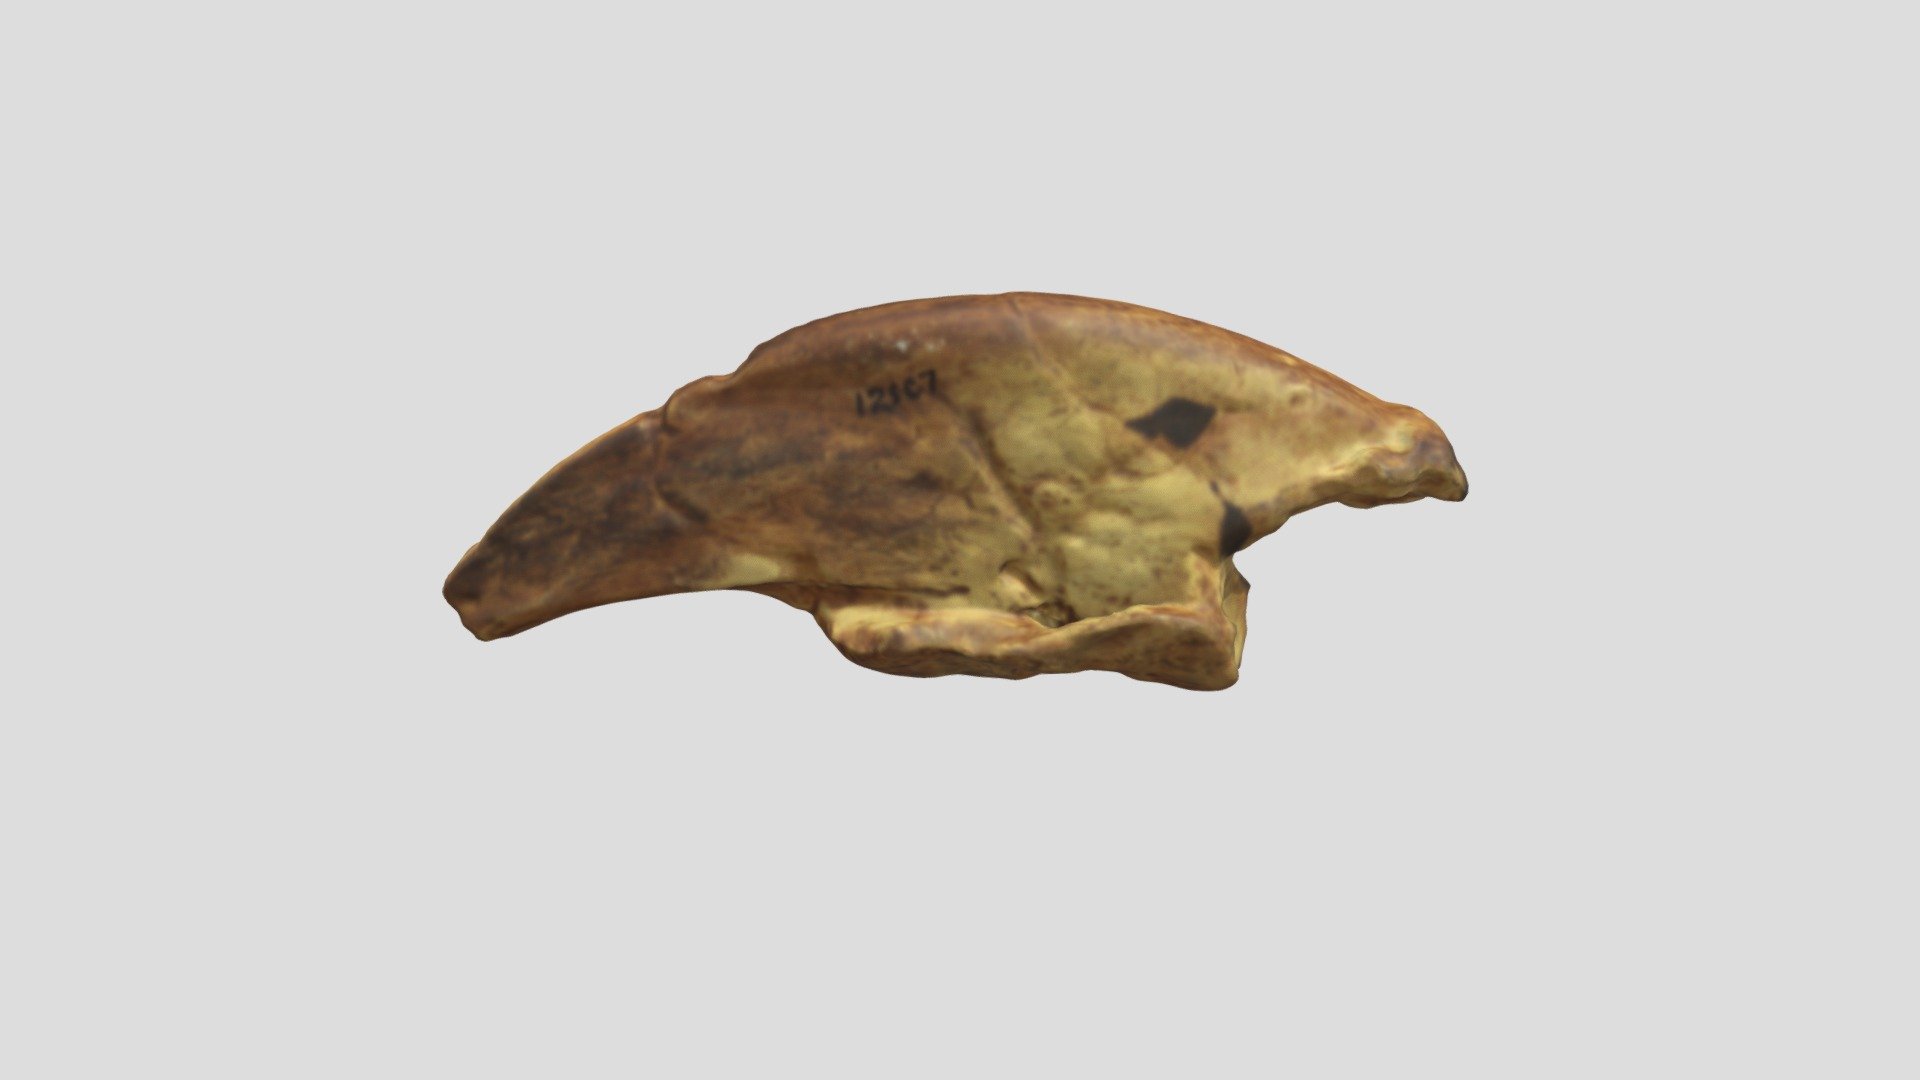 This cast of a Megalonyx claw was 3-D scanned with a Go!Scan50 scanner in December 2018 at the Academy of Natural Sciences in Philadelphia. The original giant ground sloth (Megalonyx jeffersonii) claw was sent to Thomas Jefferson in the late 1700s from a cave in what is now West Virginia.Repository specimen number ANSP 12507. It was recovered from Big Bone Lick, Kentucky by William Clark in 1807 for Thomas Jefferson. Courtesy of the Academy of Natural Sciences. A Virginia Commonwealth University Seed Grant supported the research trip that made this scanning effort possible.
A higher resolution scan made in March 2020 of the real claw is available at: https://skfb.ly/6RIZu - Megalonyx Claw Cast (VCU_3D_4147) - 3D model by Virtual Curation Lab (@virtualcurationlab) 3d model